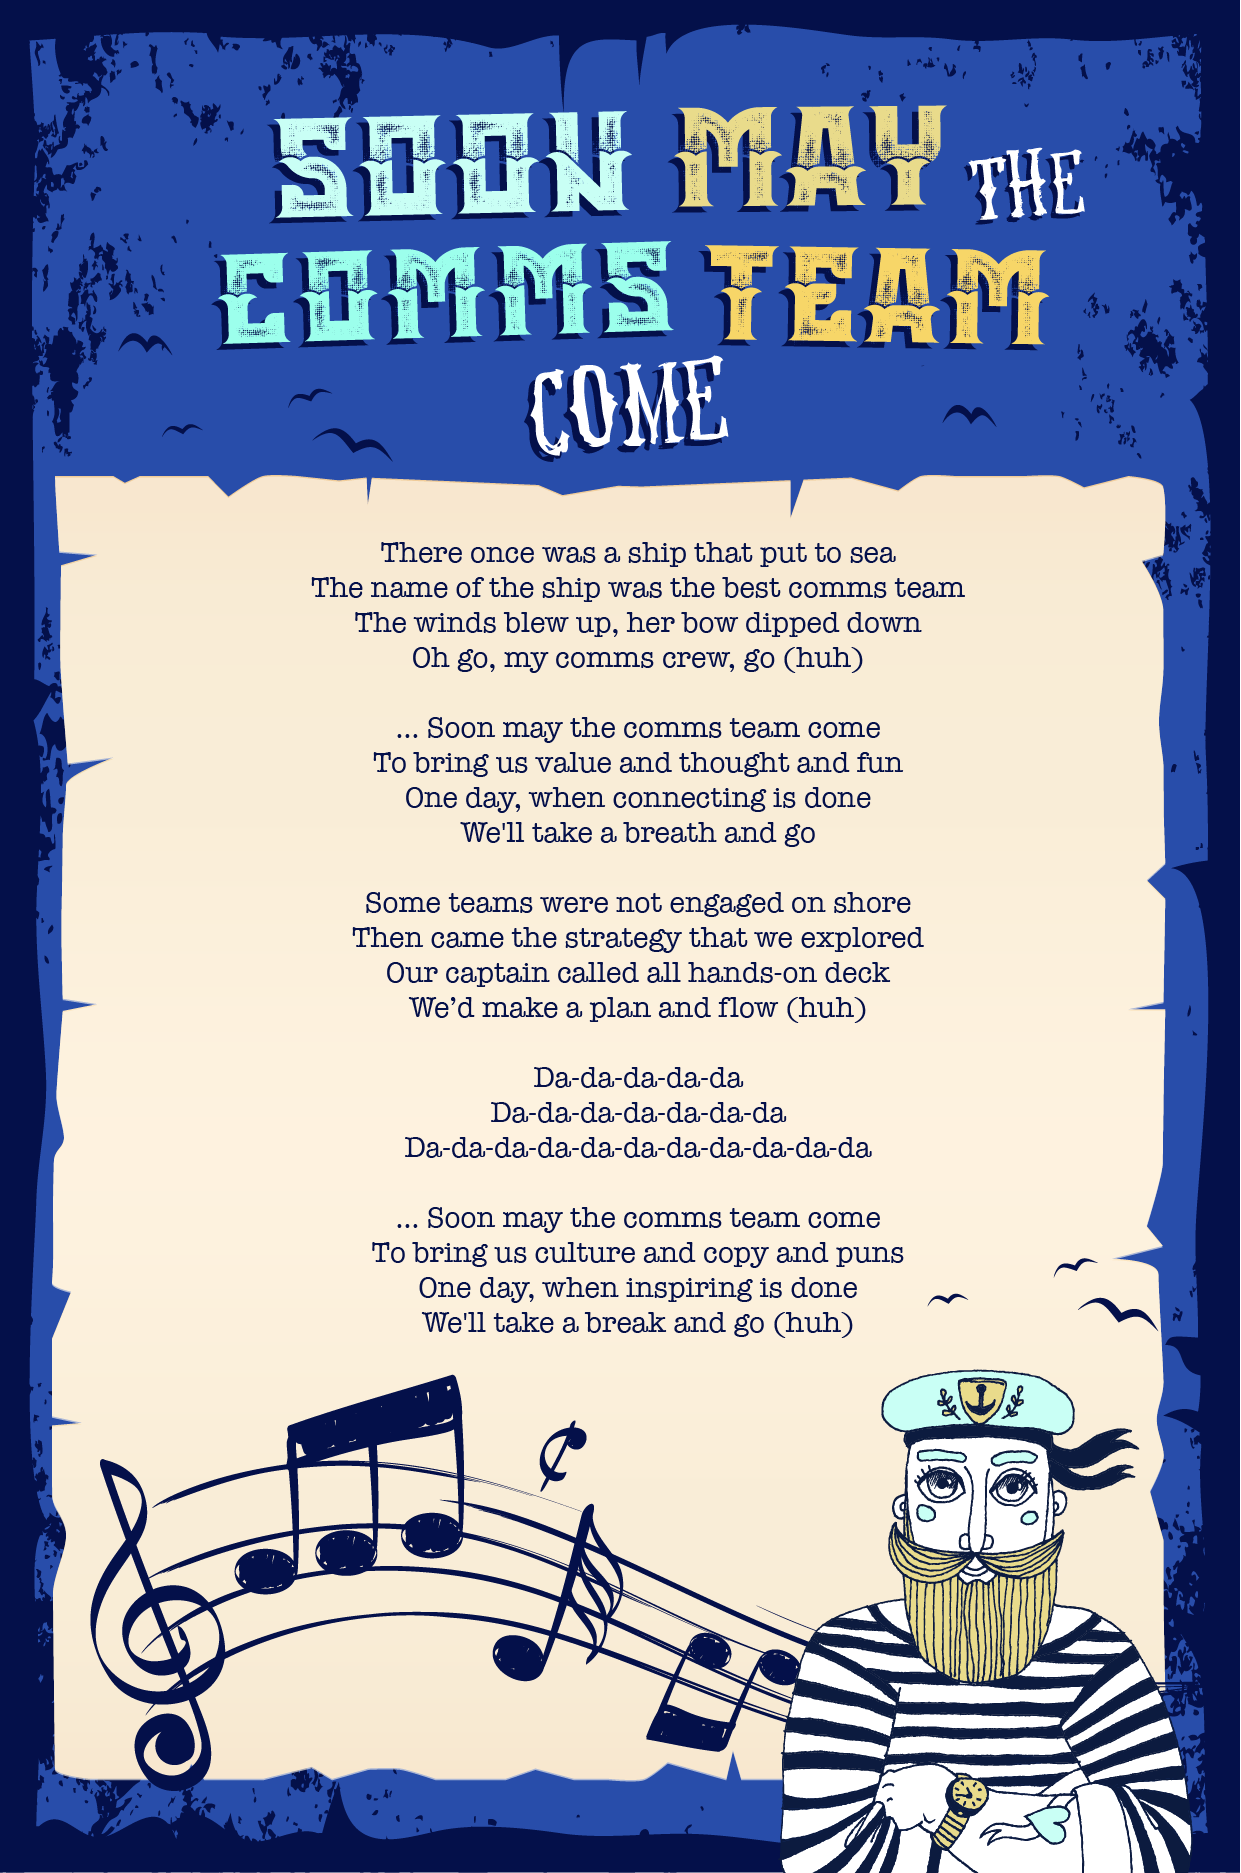 lyric sheet for the sea shanty: There once was a ship that put to sea The name of the ship was the best comms team The winds blew up, her bow dipped down Oh go, my comms crew, go (huh) … Soon may the comms team come To bring us value and thought and fun One day, when connecting is done We'll take a breath and go Some teams were not engaged on shore Then came the strategy that we explored Our captain called all hands-on deck We’d make a plan and flow (huh) Da-da-da-da-da Da-da-da-da-da-da-da Da-da-da-da-da-da-da-da-da-da-da … Soon may the comms team come To bring us culture and copy and puns One day, when inspiring is done We'll take a break and go (huh)